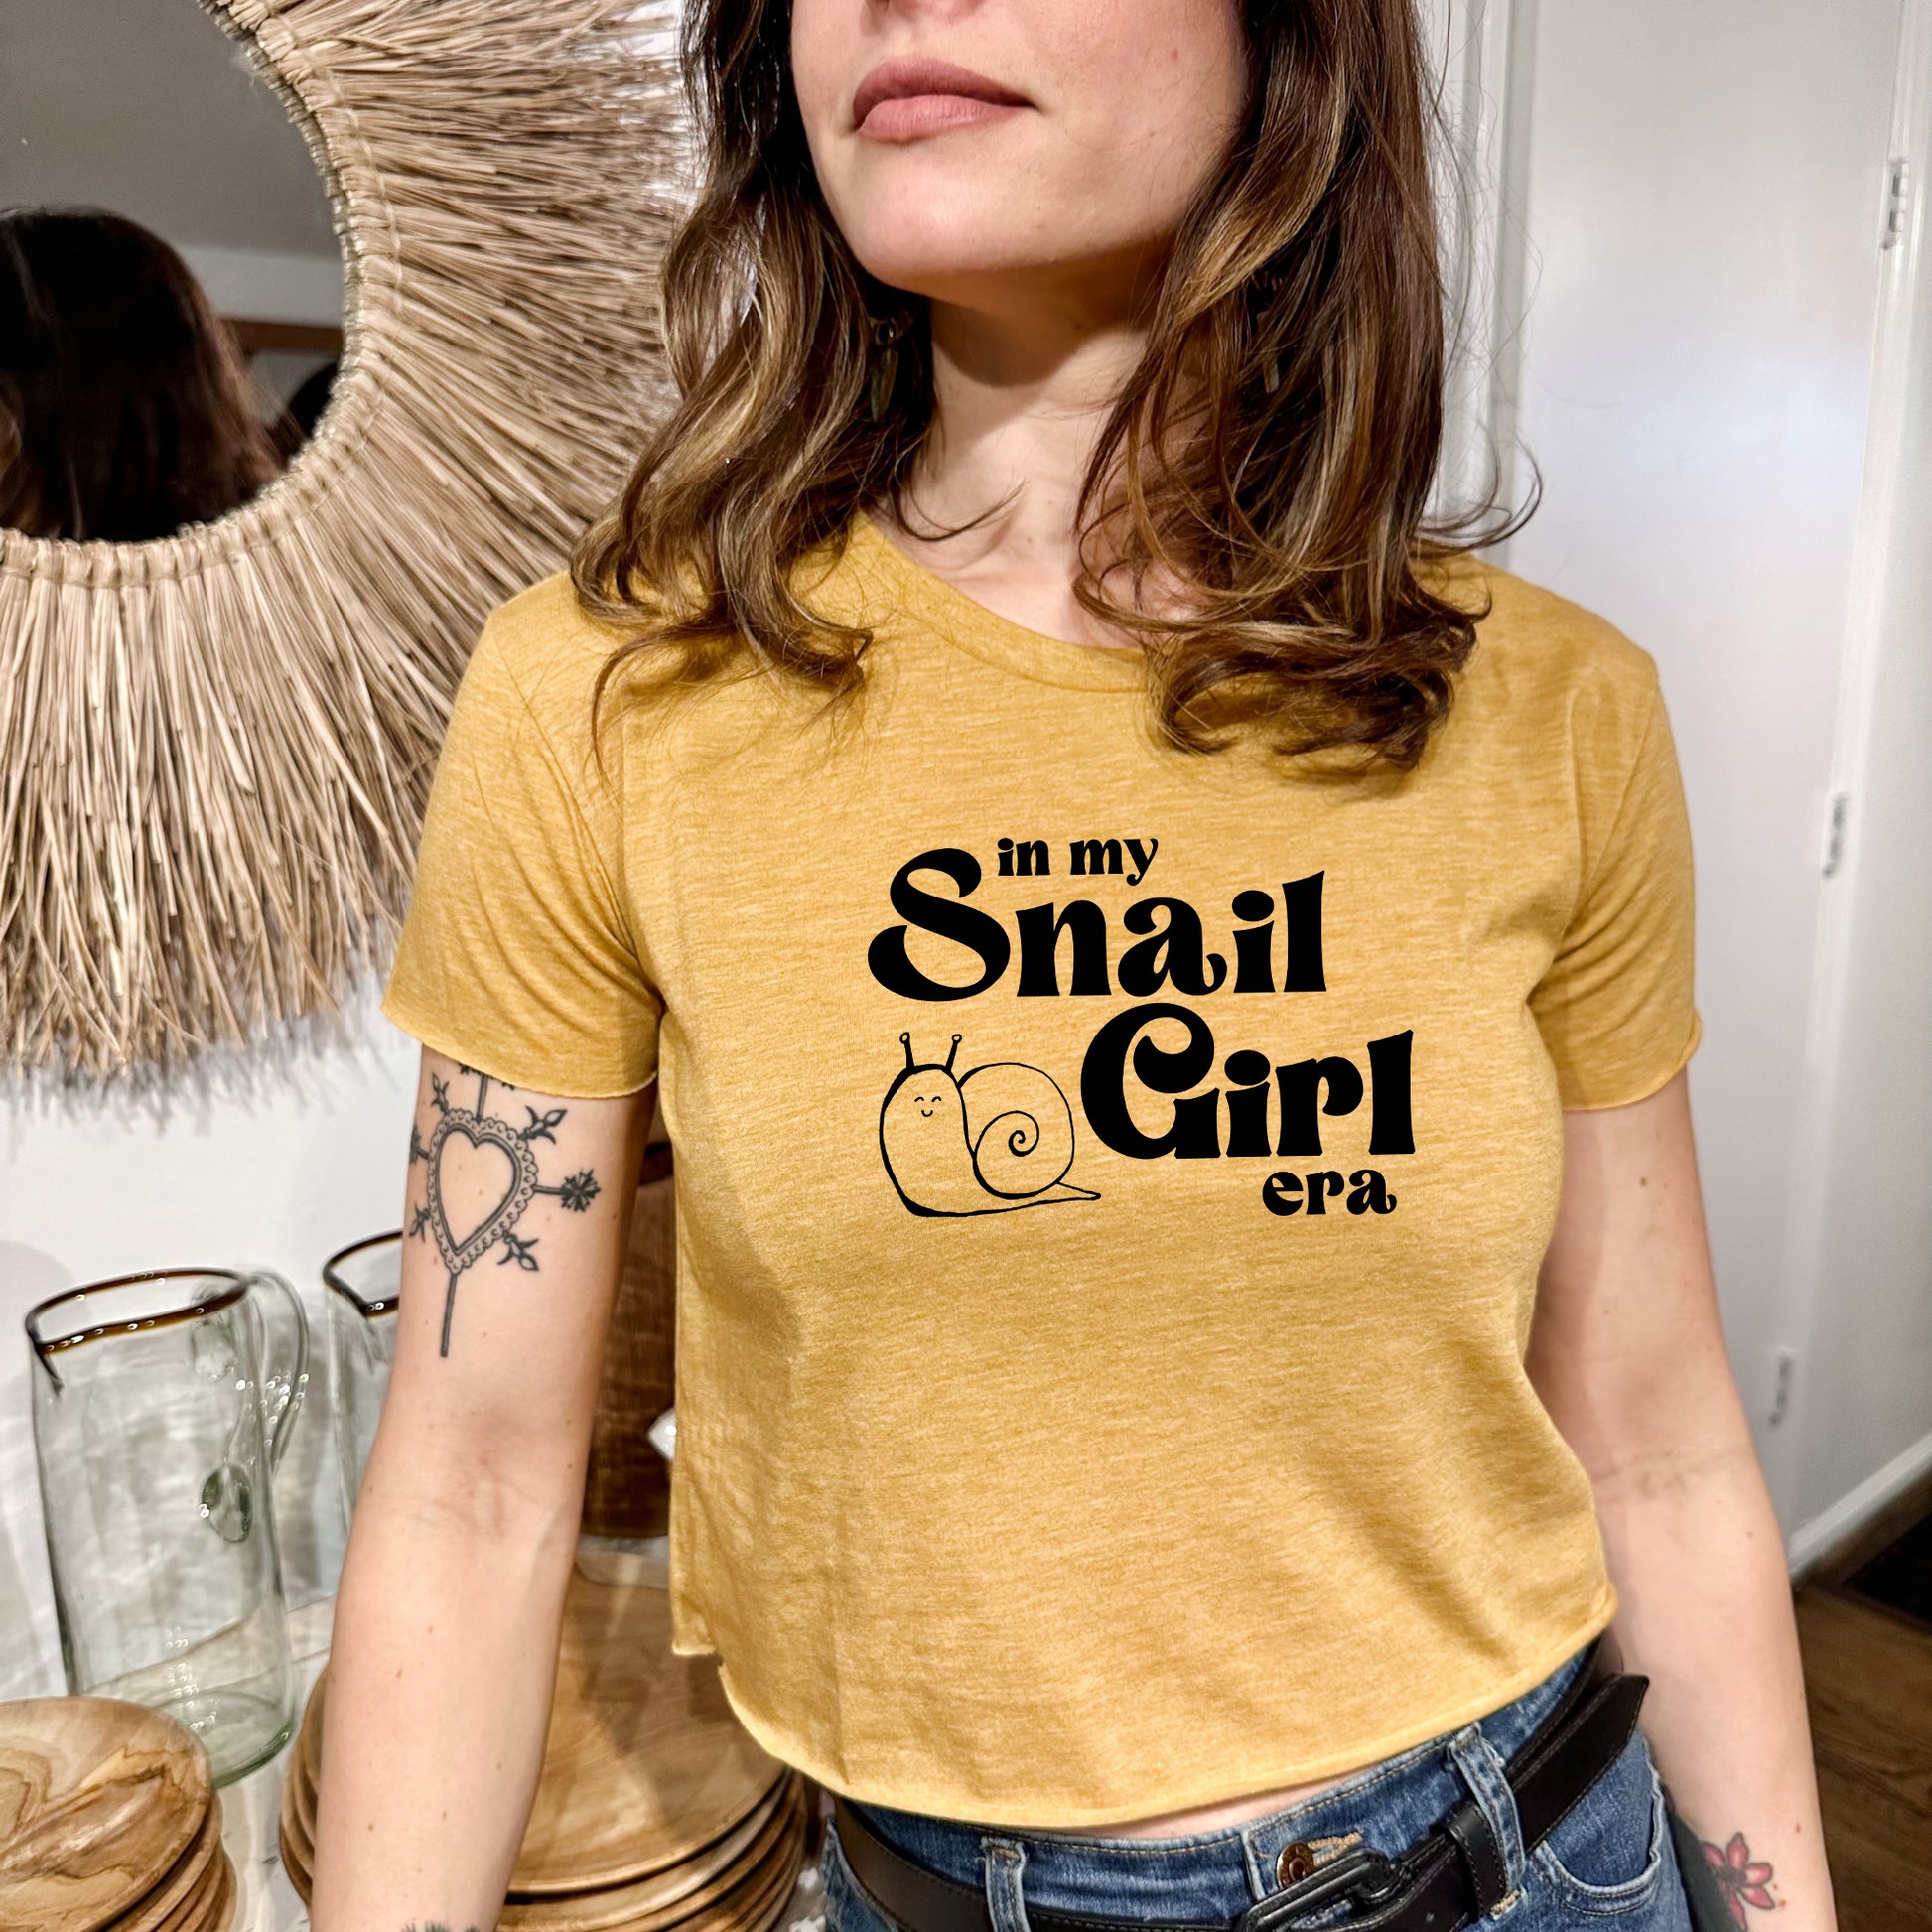 a woman wearing a yellow shirt with a snail girl on it